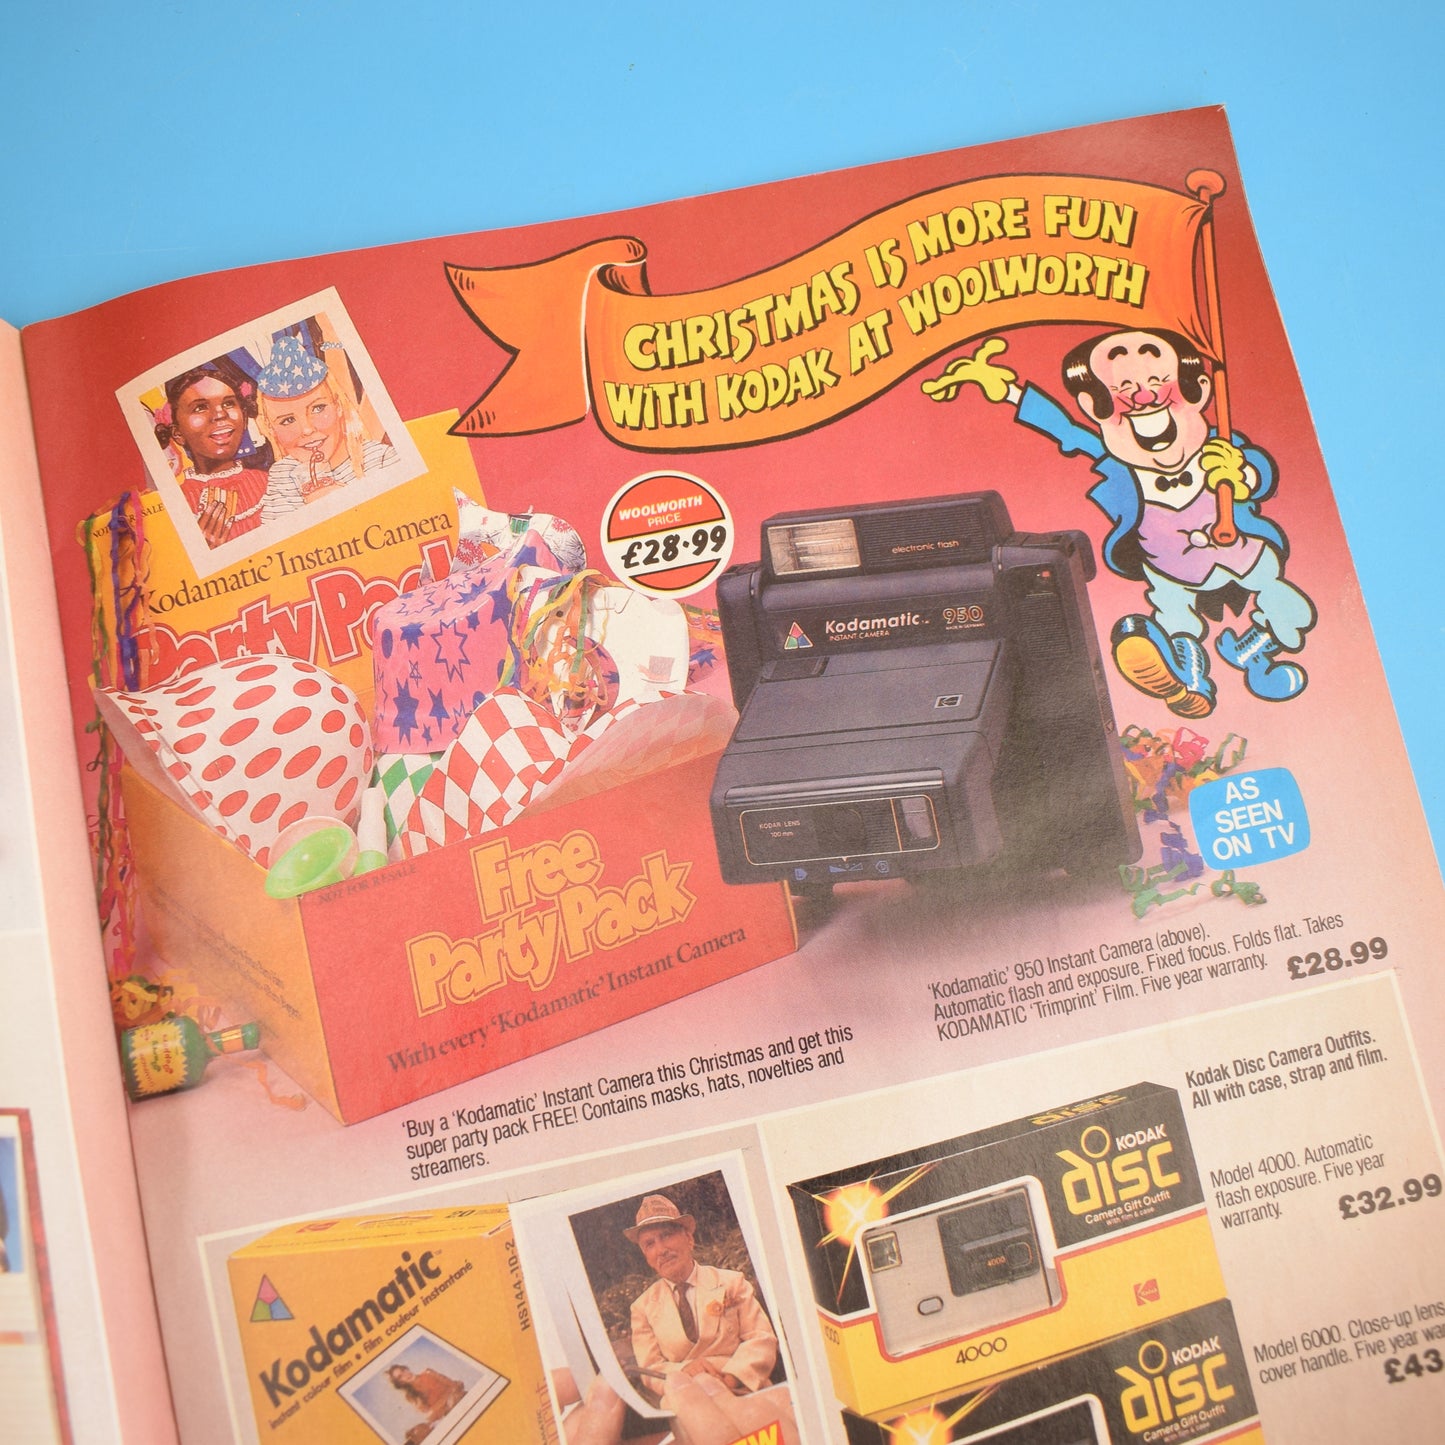 Vintage 1980s Woolworths Christmas Catalogue